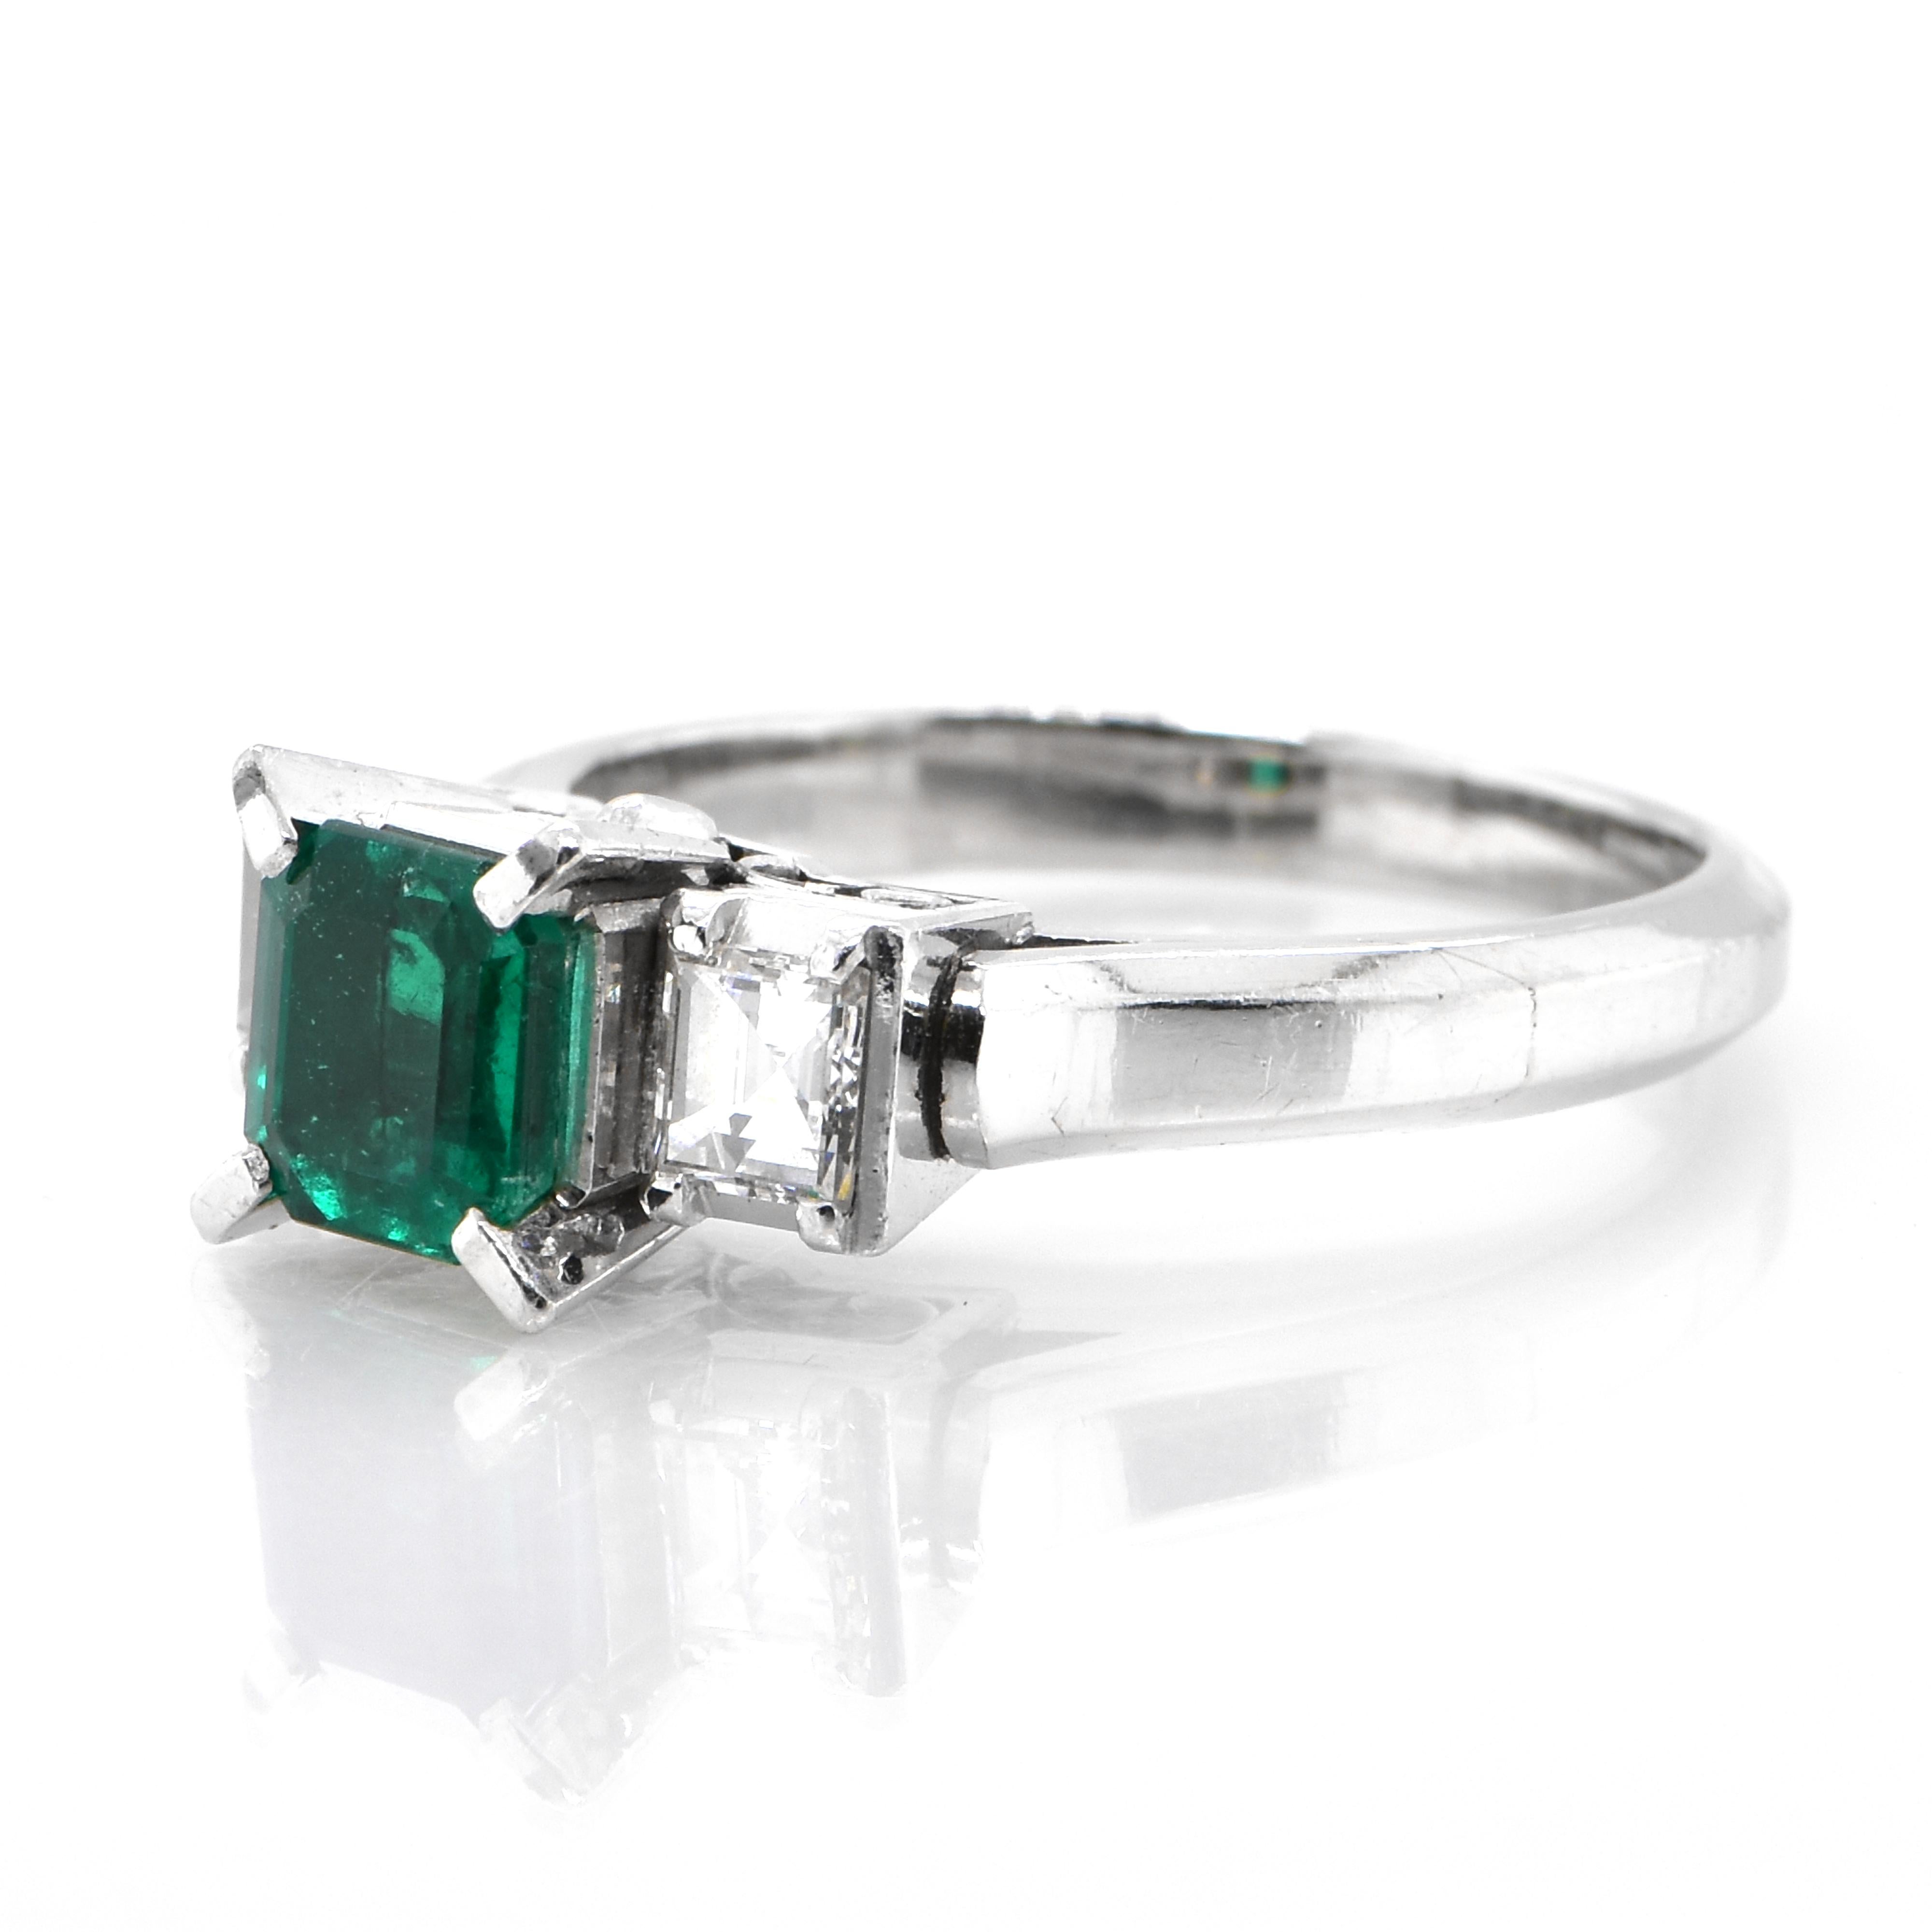 Emerald Cut GIA Certified 0.97 Carat 'No Oil' (Untreated), Colombian Emerald & Diamond Ring For Sale